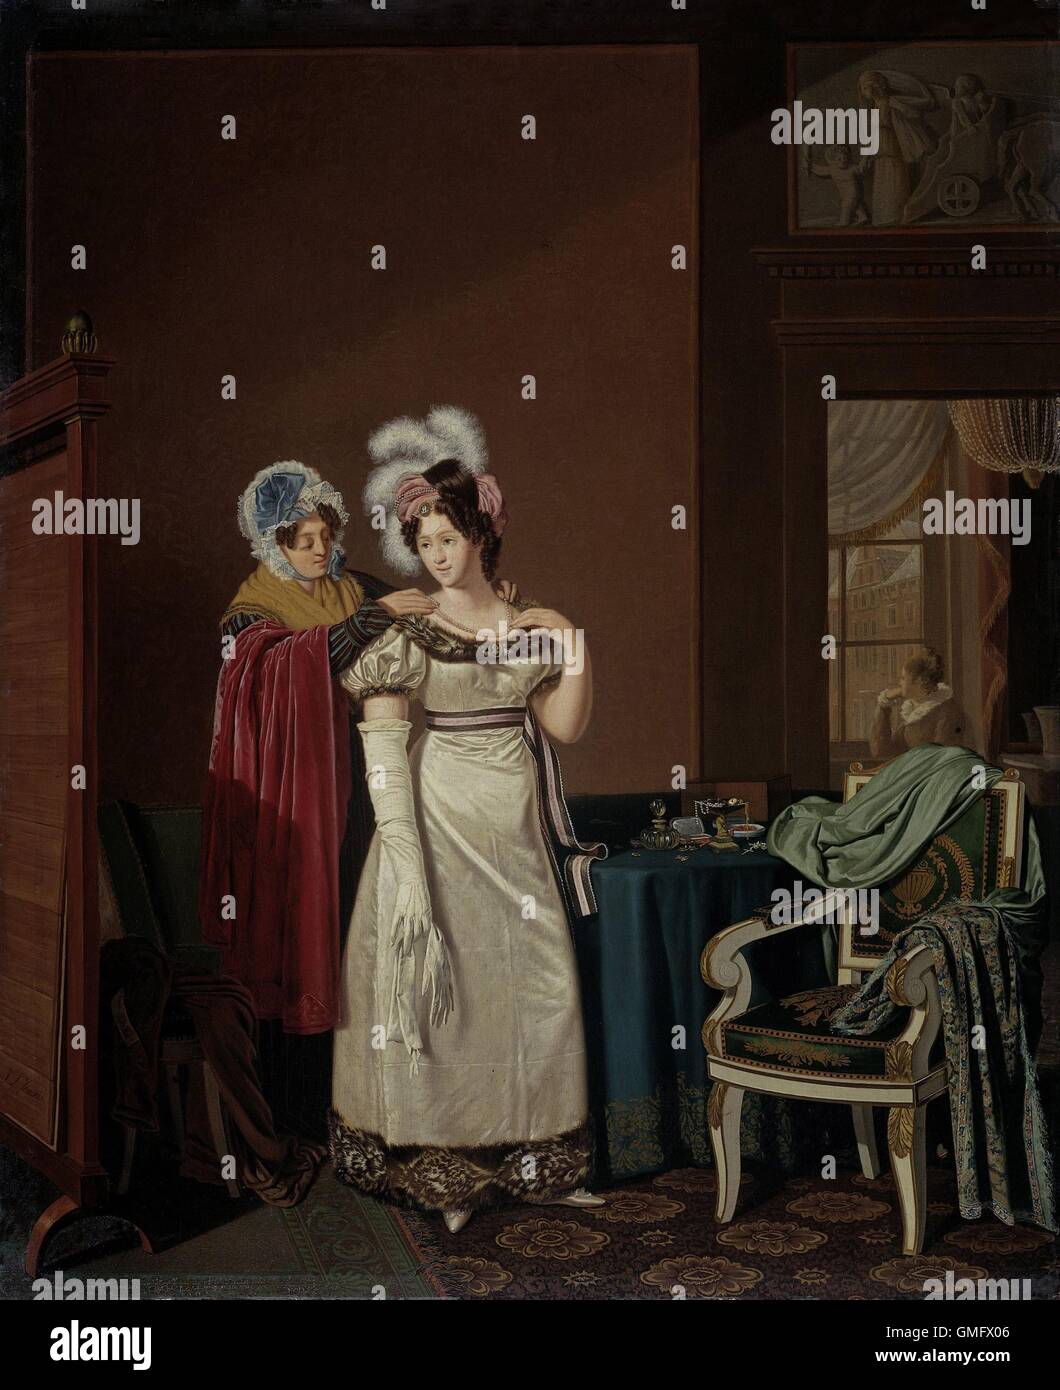 The Toilet, by Jan Lodewijk Jonxis, 1830-50, Dutch painting, oil on panel. Interior in which a woman dressing in front of a mirror with the assistance of a servant. On right another woman looks out a window (BSLOC 2016 2 117) Stock Photo